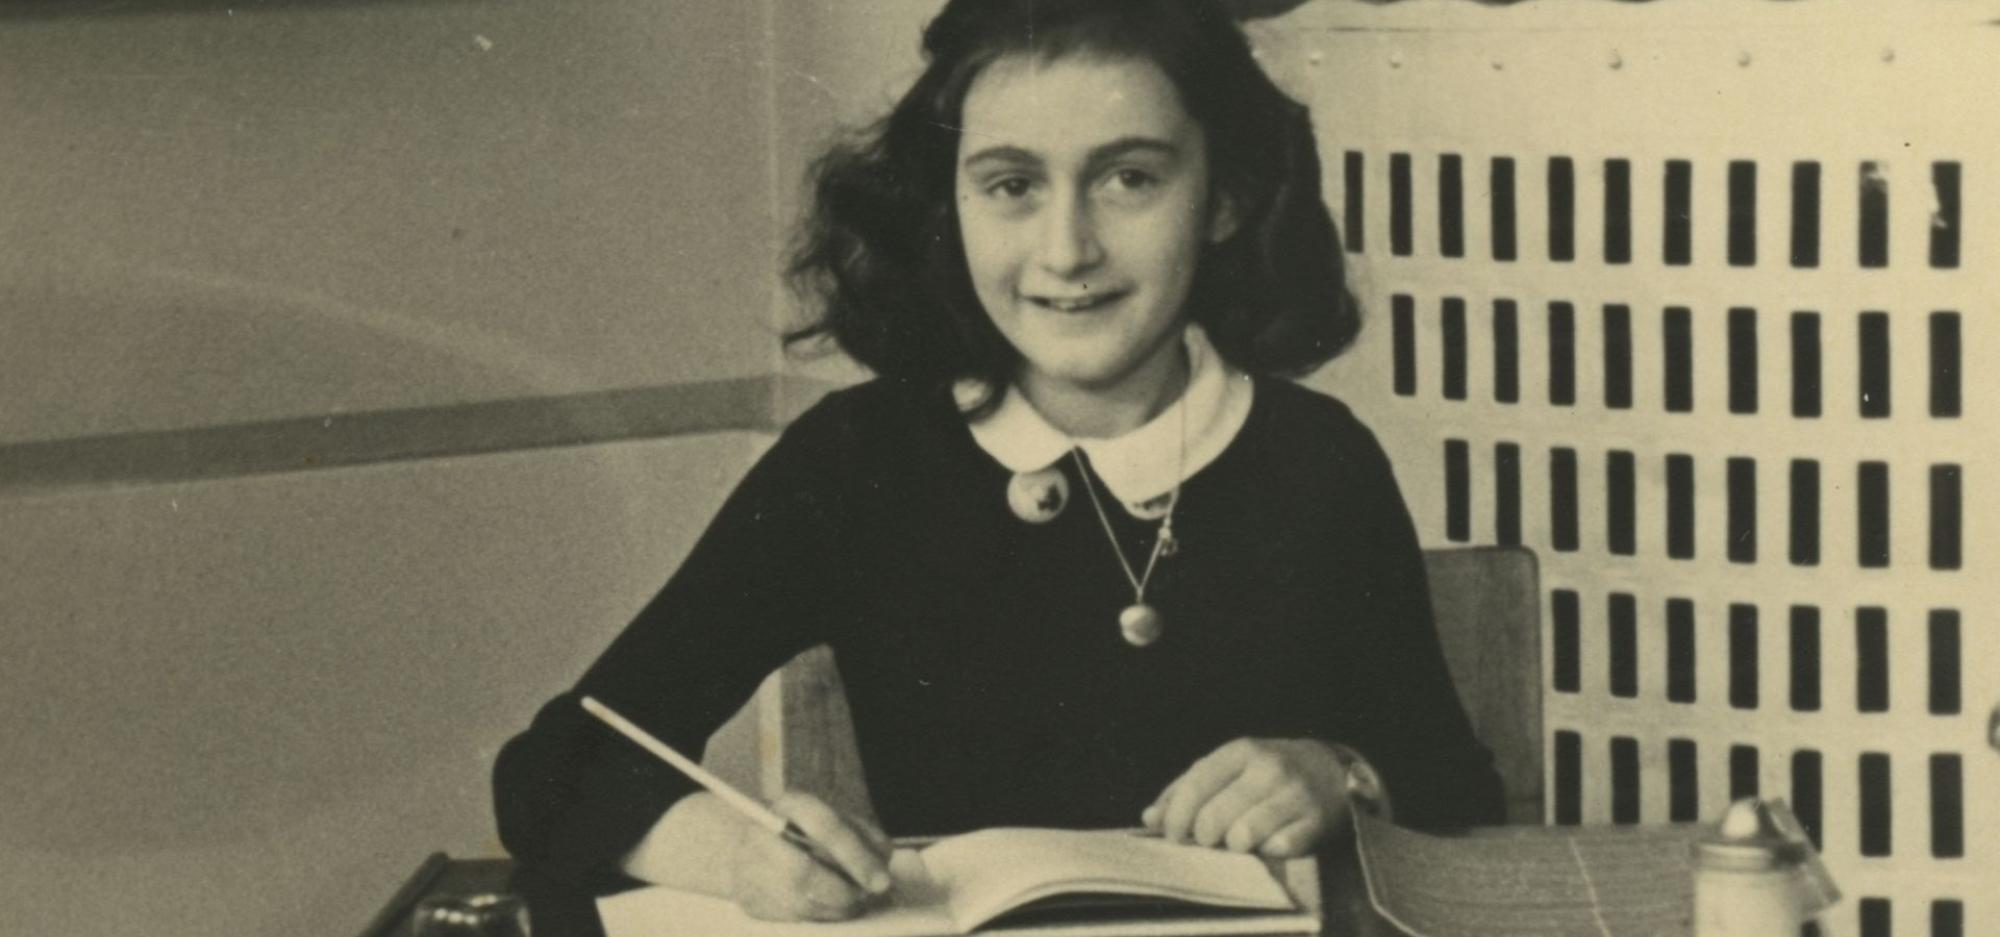 A photograph of a young girl sitting at a school desk